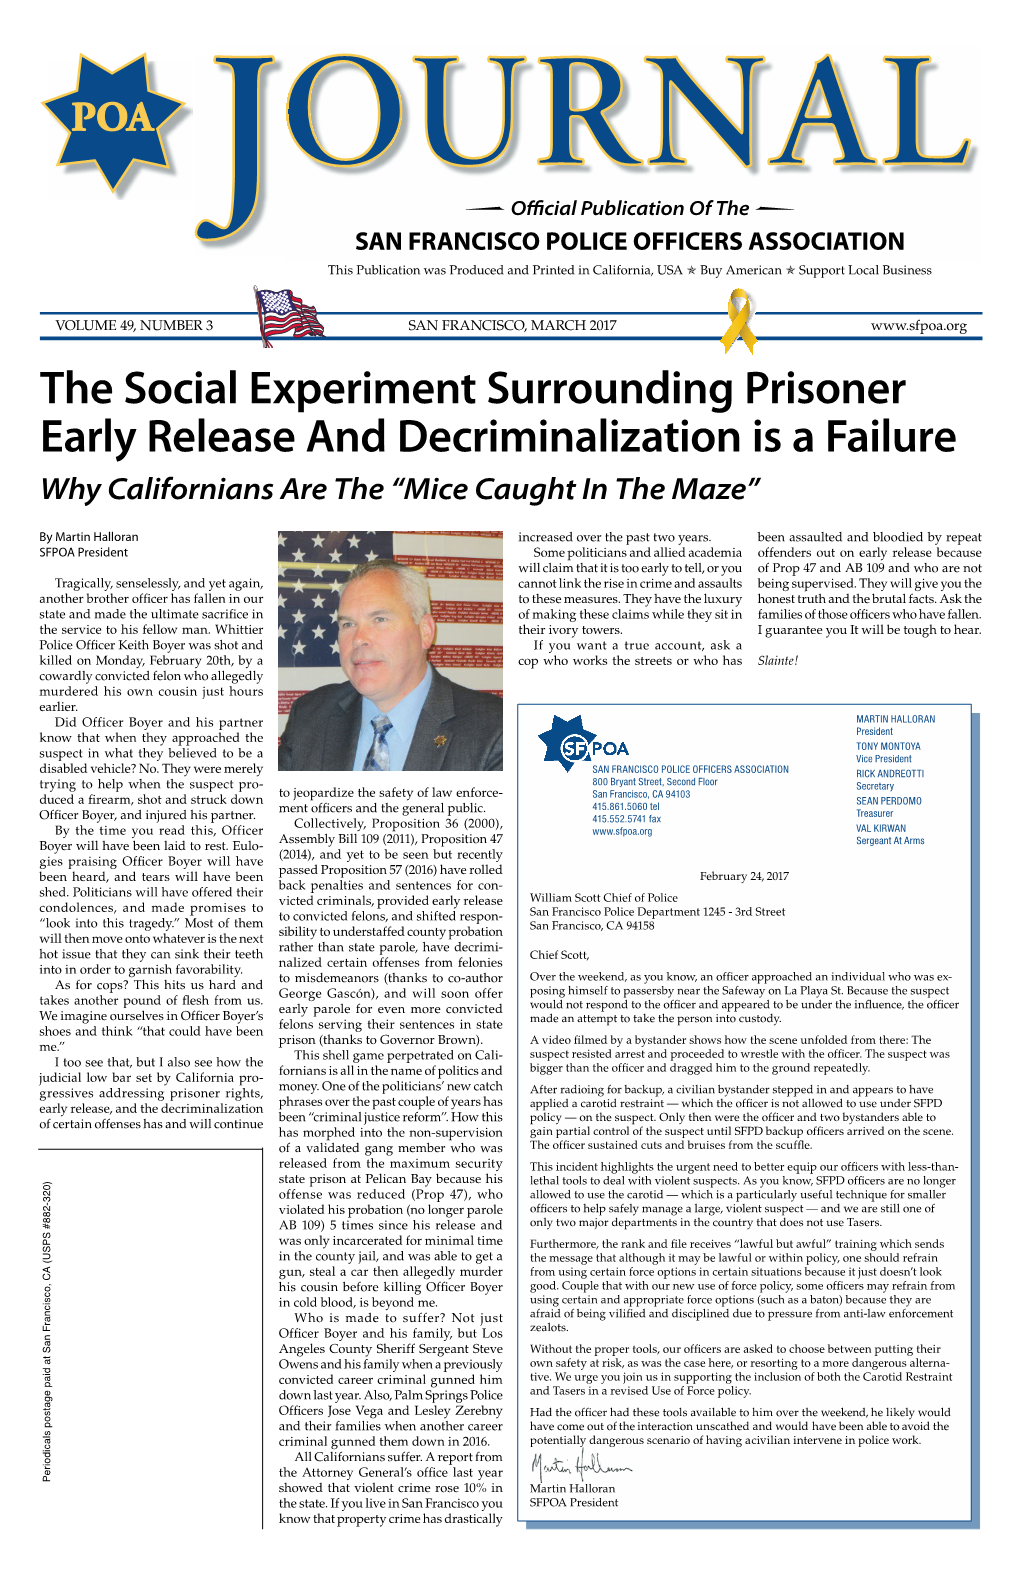 The Social Experiment Surrounding Prisoner Early Release and Decriminalization Is a Failure Why Californians Are the “Mice Caught in the Maze”